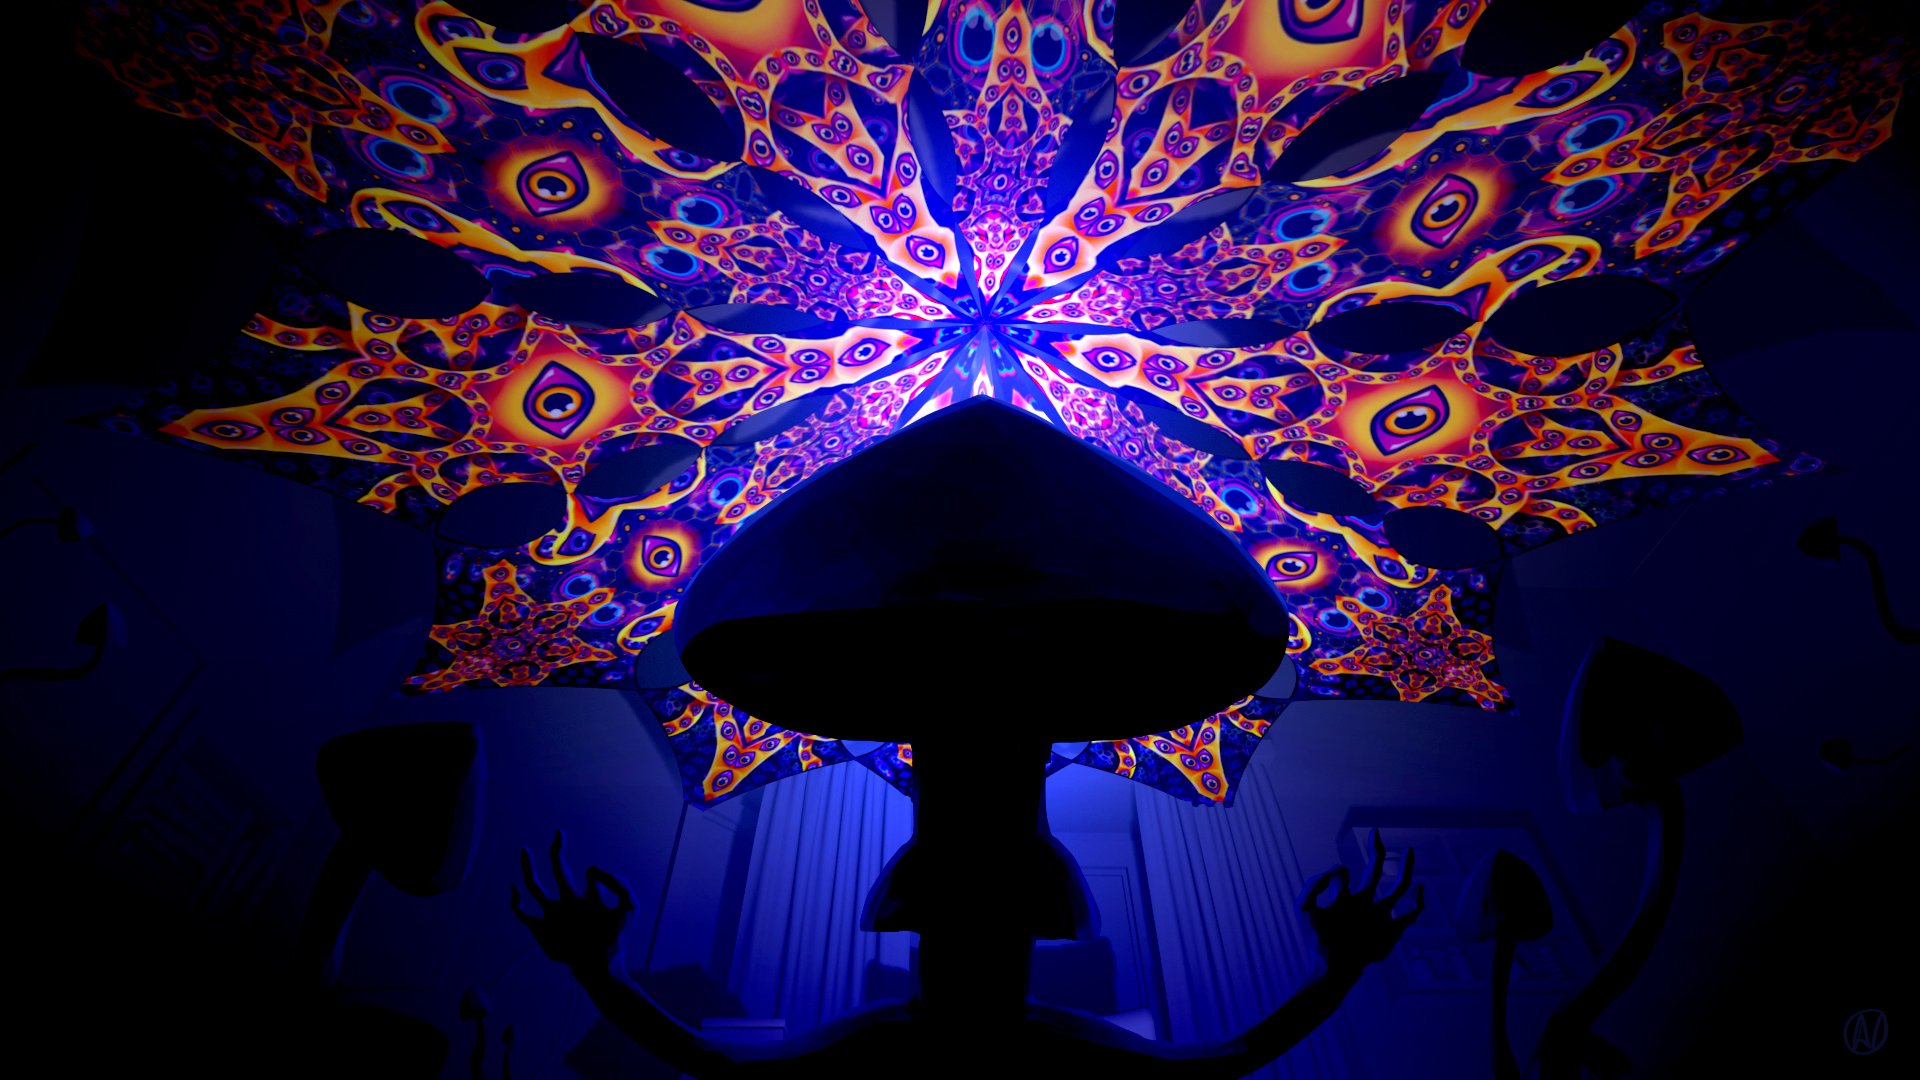 psychedelic mushroom backgrounds